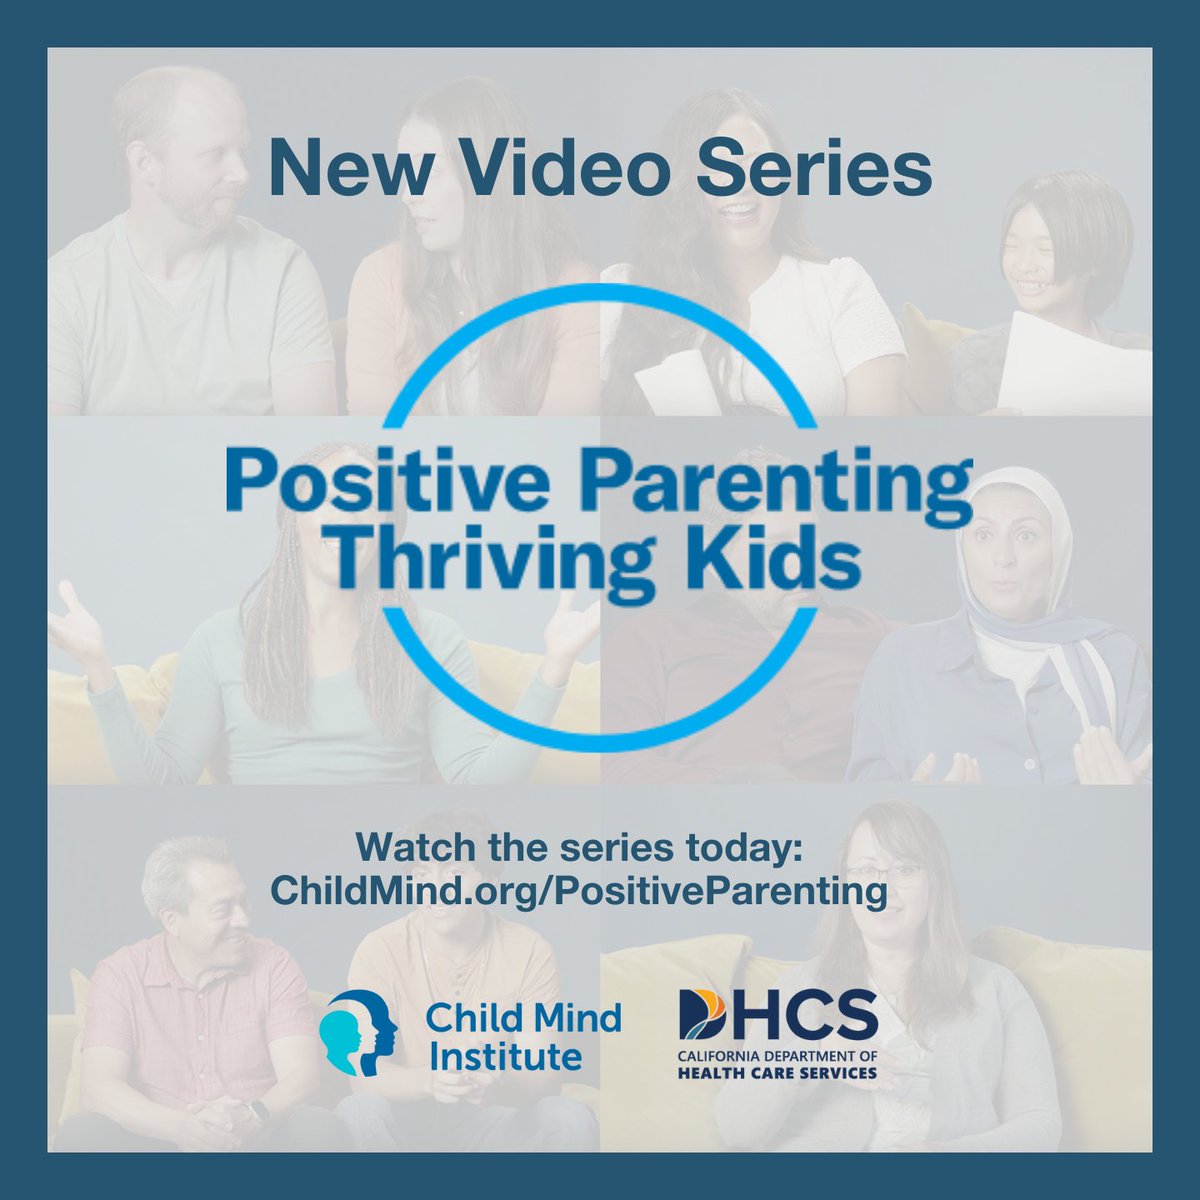 The @DHCS_CA in partnership with the @childmindinst, released a new video series, Positive Parenting, Thriving Kids, providing parents and caregivers with resources to help resolve potential parenting challenges. Watch the series today: bit.ly/3JEzAAh